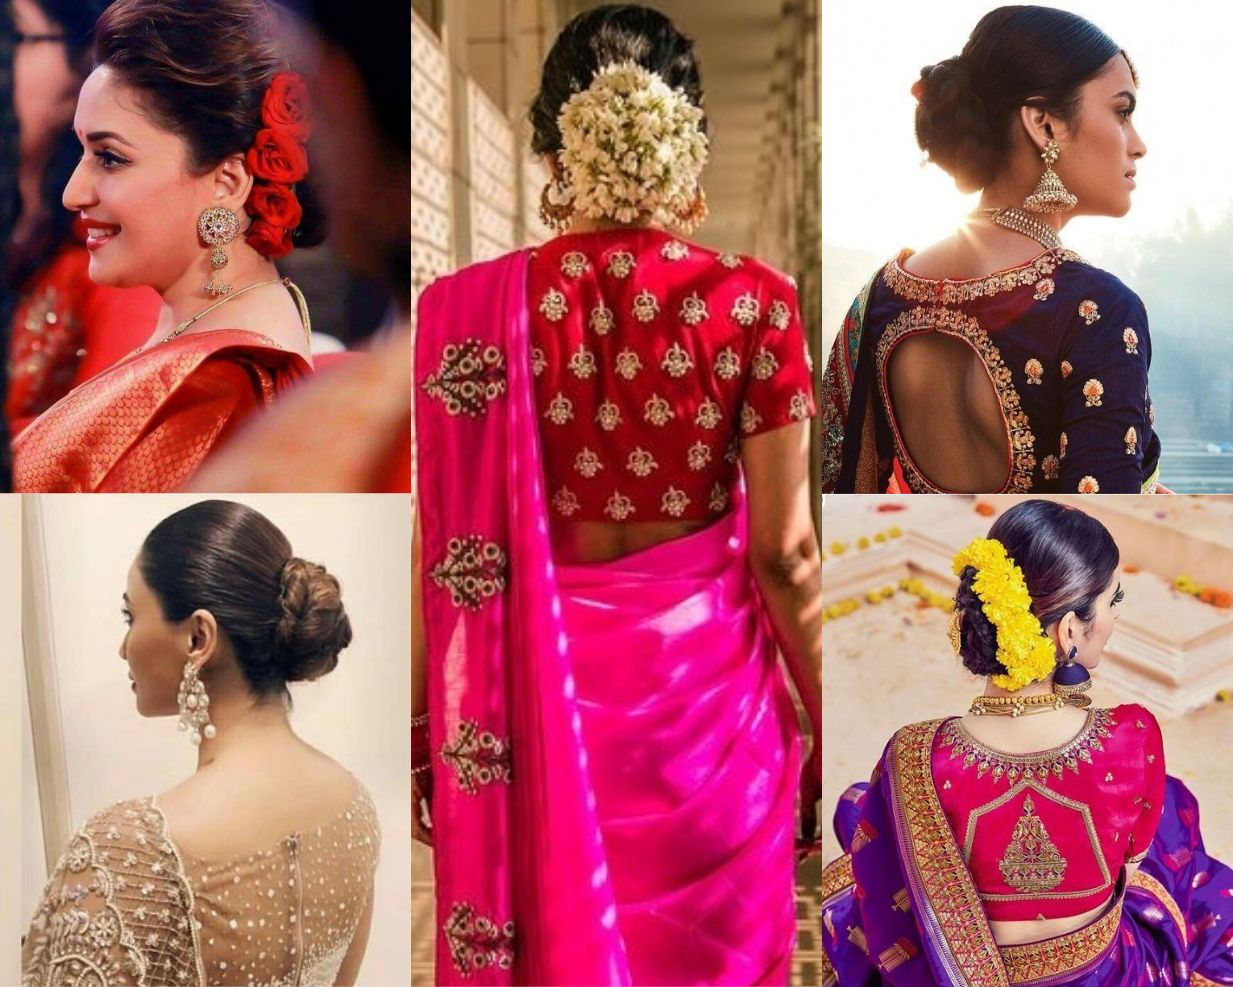 20 Stunning Gajra Hairstyles for Women to Try in 2023